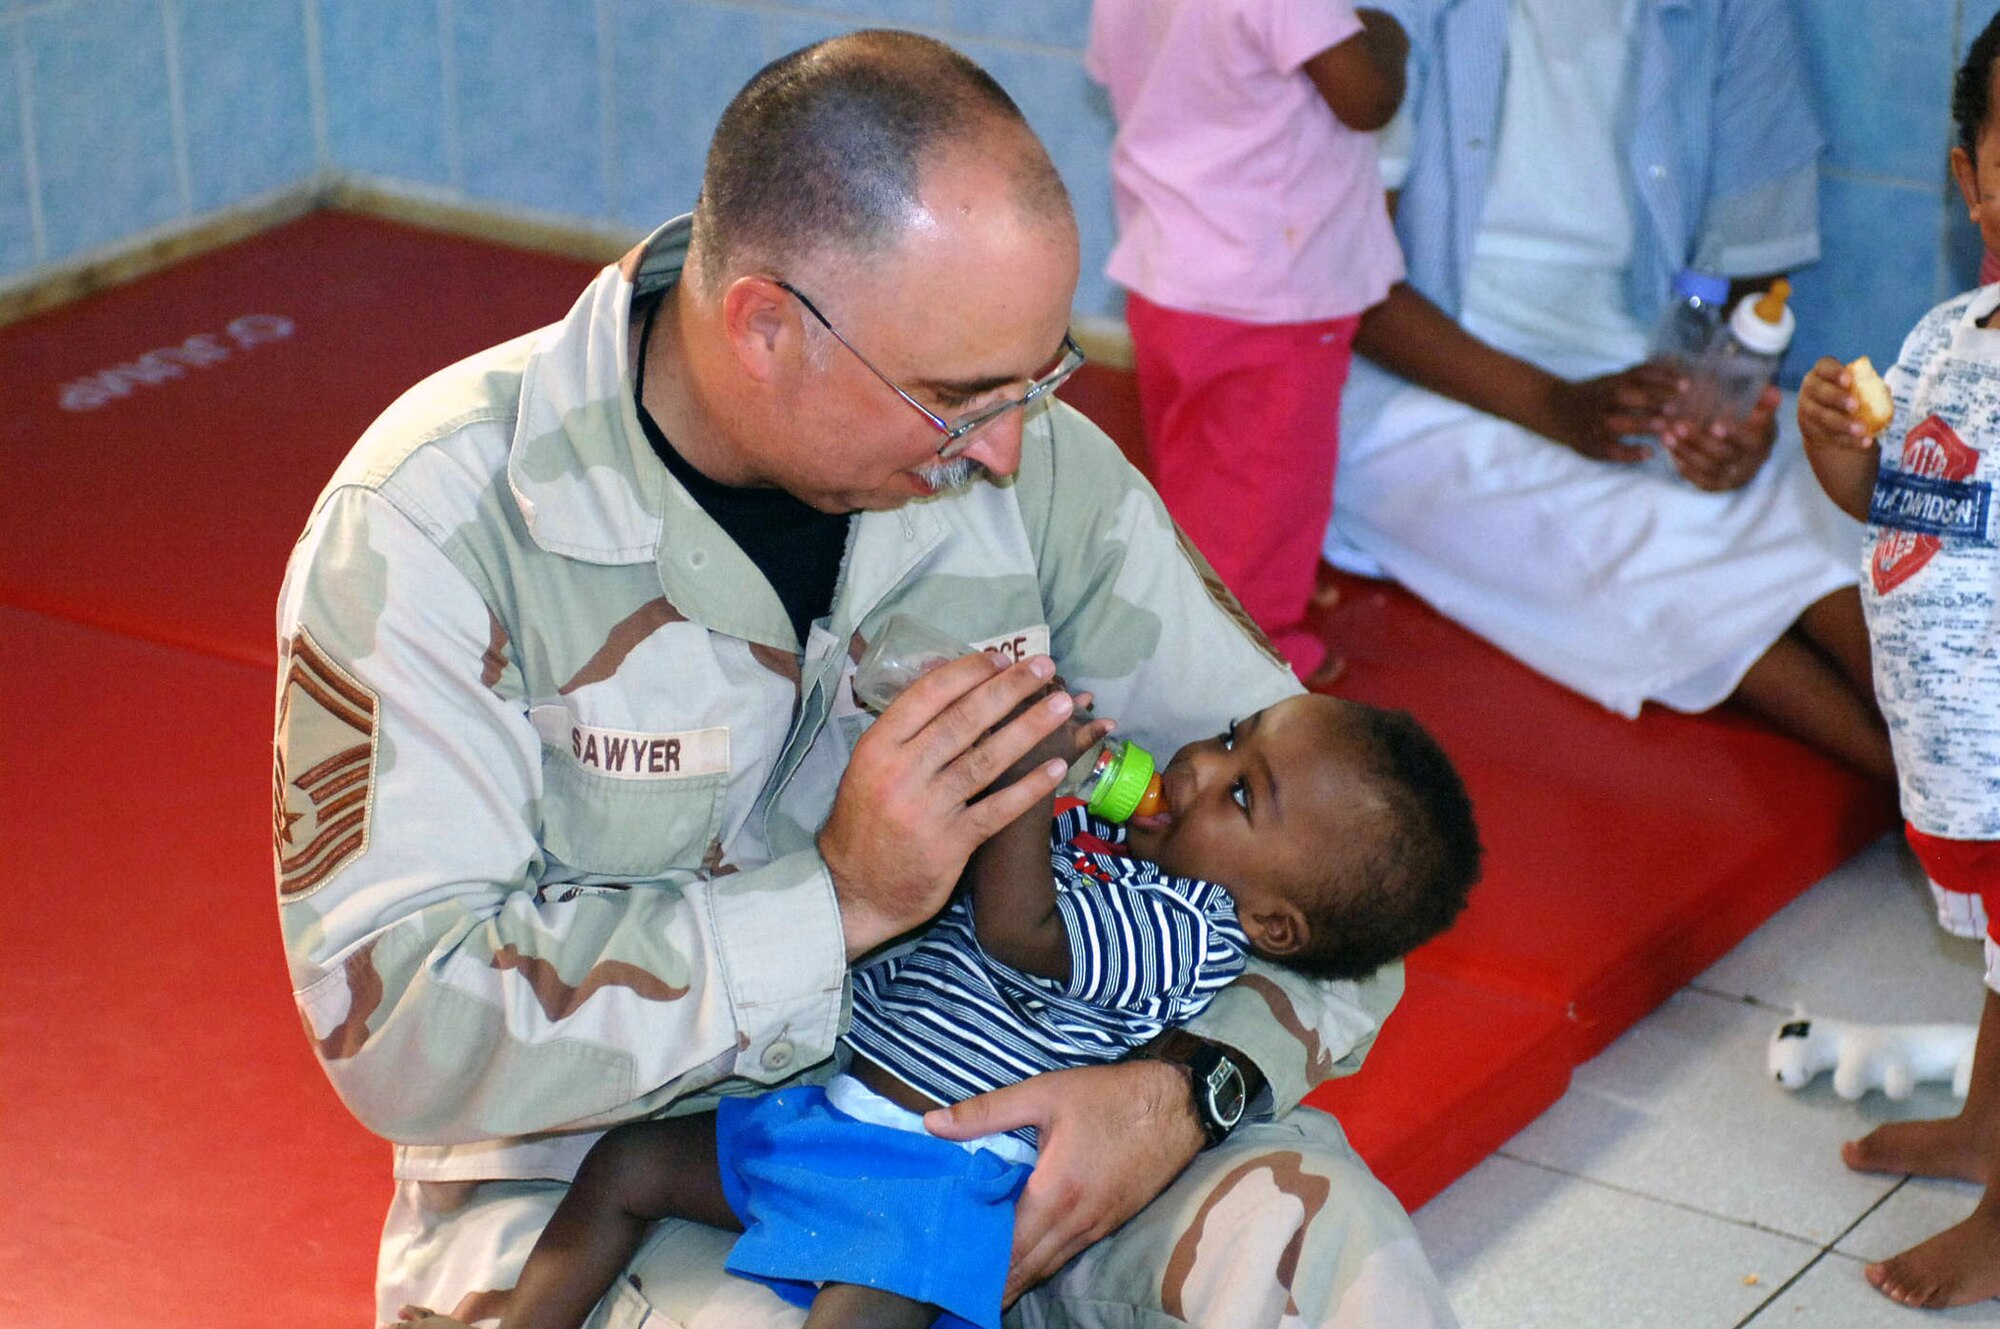 Senior Master Sgt. Jeff Sawyer gives a baby a bottle July 12 at the baby orphanage near Camp Lemonier in Djibouti. Sergeant Sawyer is the U.S. Central Air Forces Command chaplain assistant functional manager. He and Chaplain (Col.) Gregory Tate, the CENTAF command chaplain, visited Djibouti as part of his Central Command area of operation tour, observing Air Force chaplain services and religious support teams. (U.S. Navy photo/Perry Officer 1st Class John Osborne)
